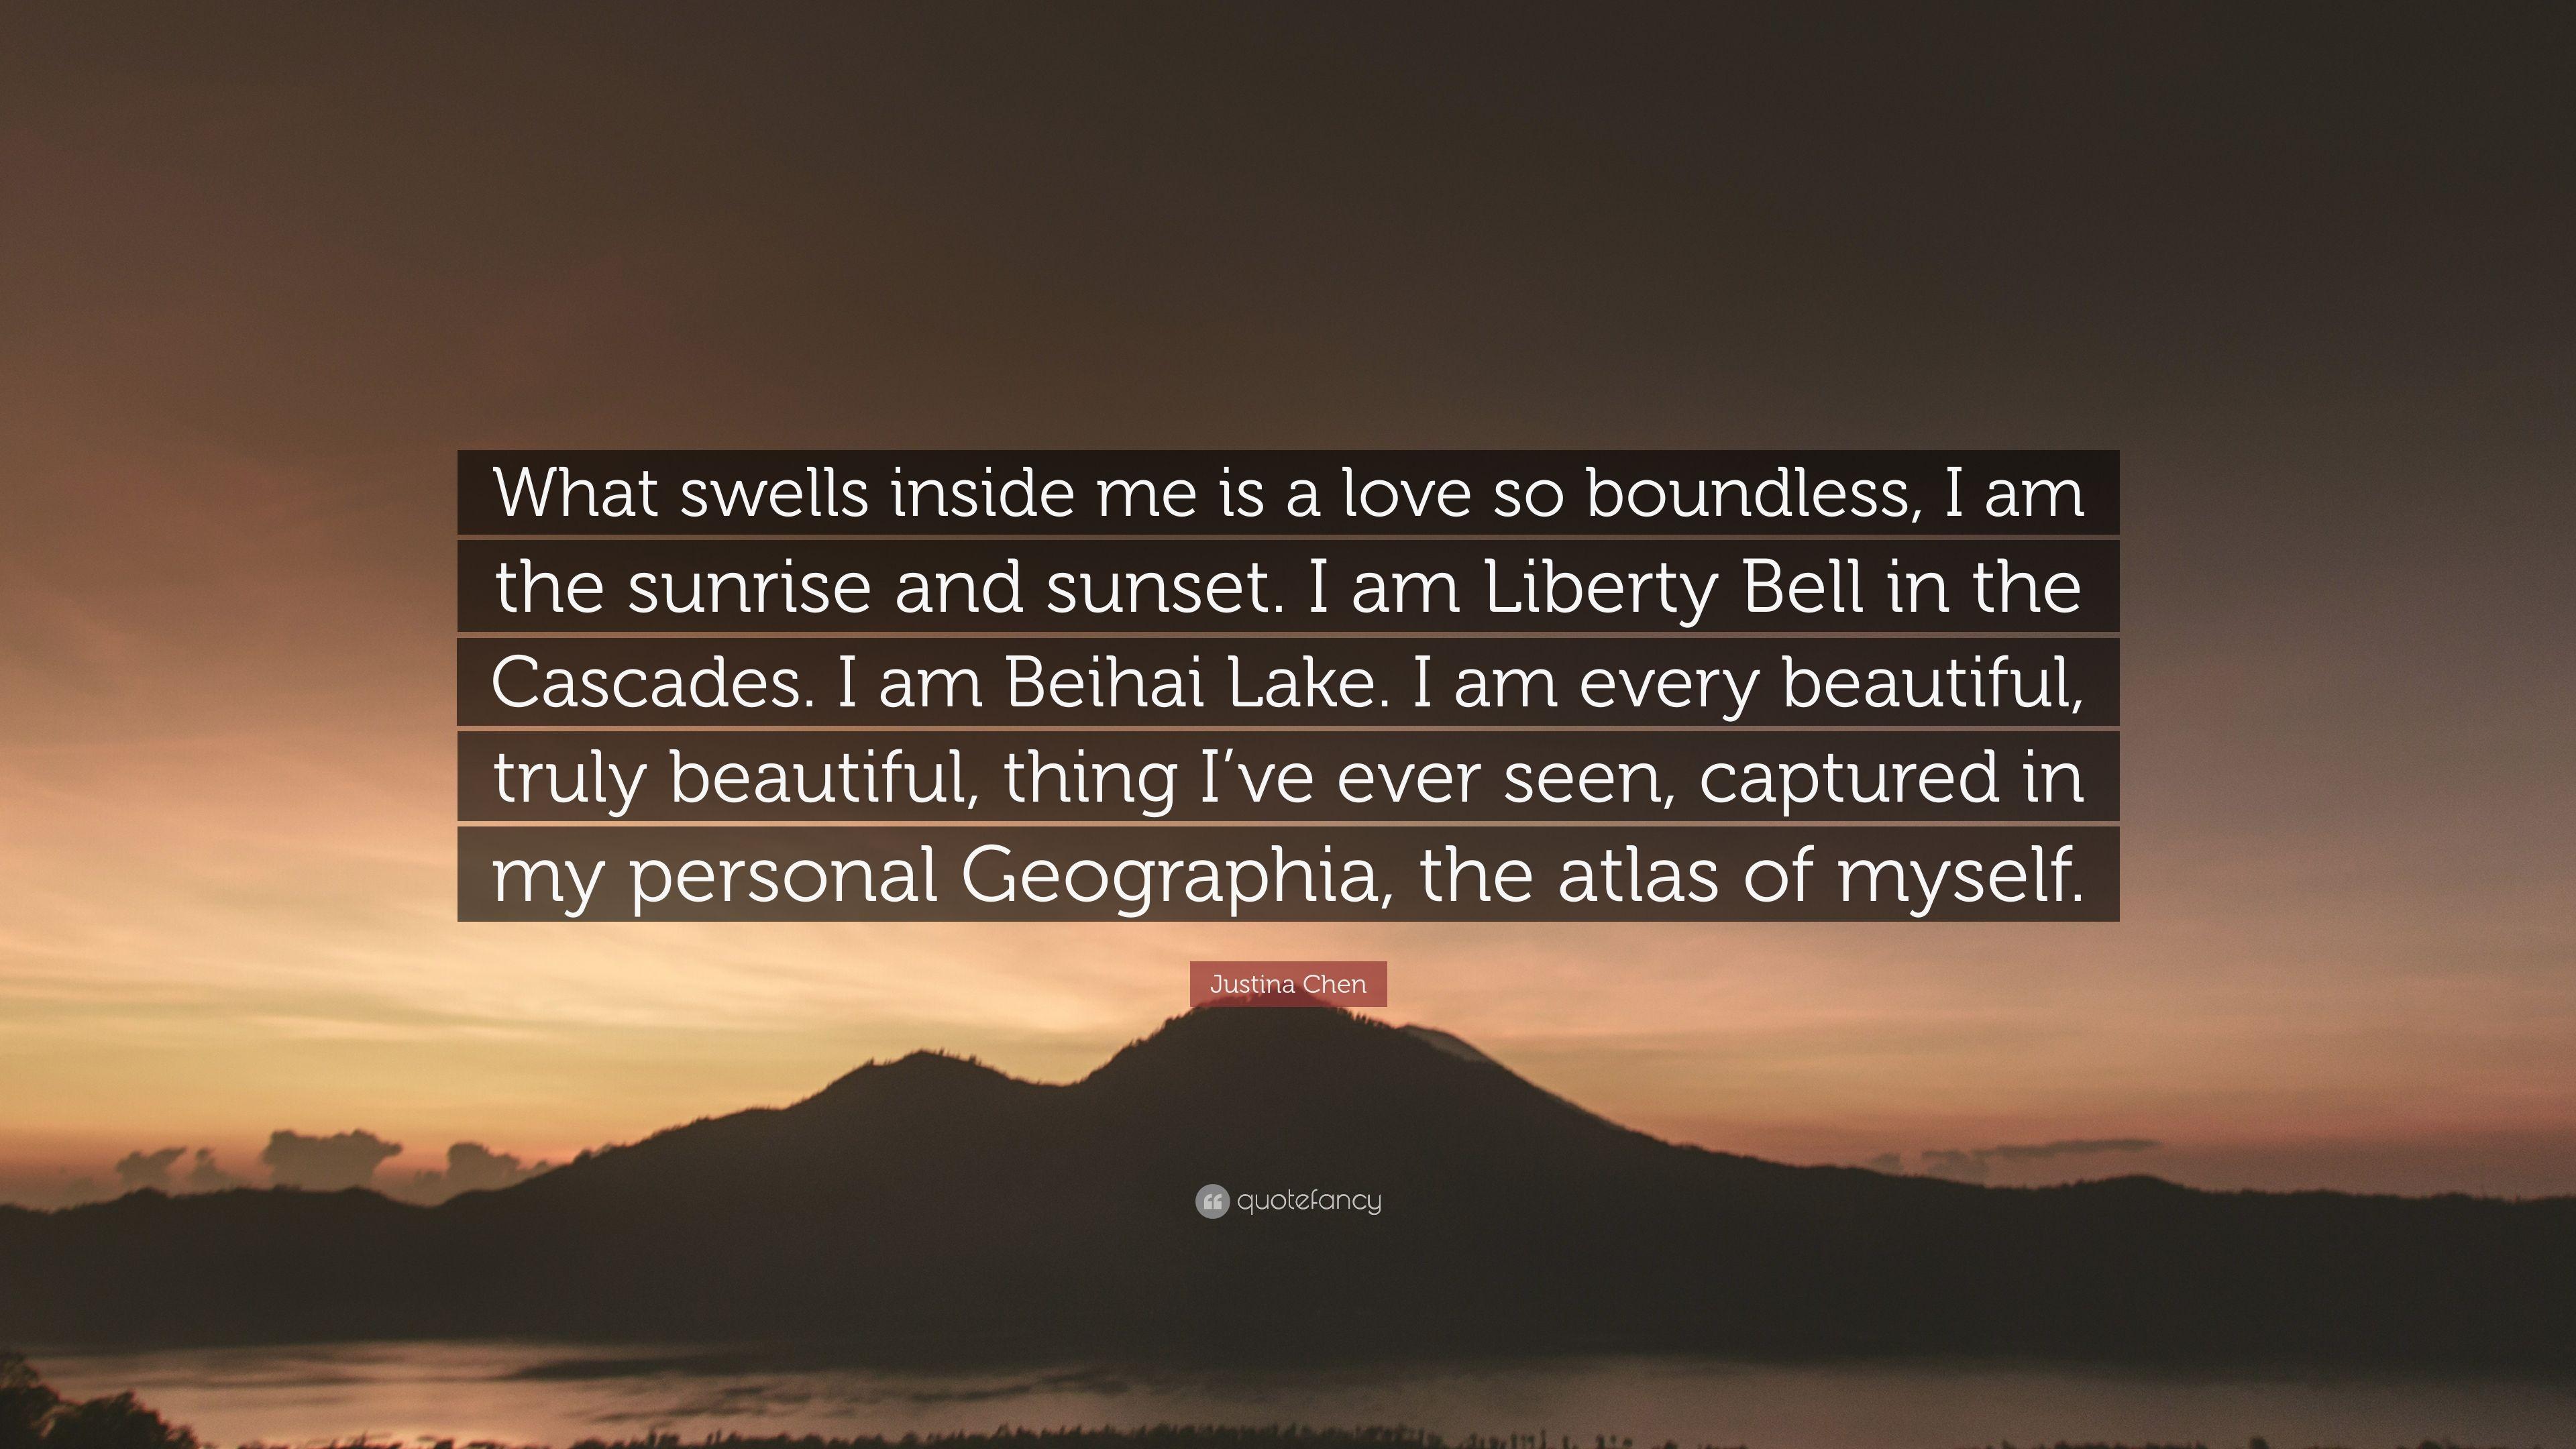 Justina Chen Quote: “What swells inside me is a love so boundless, I